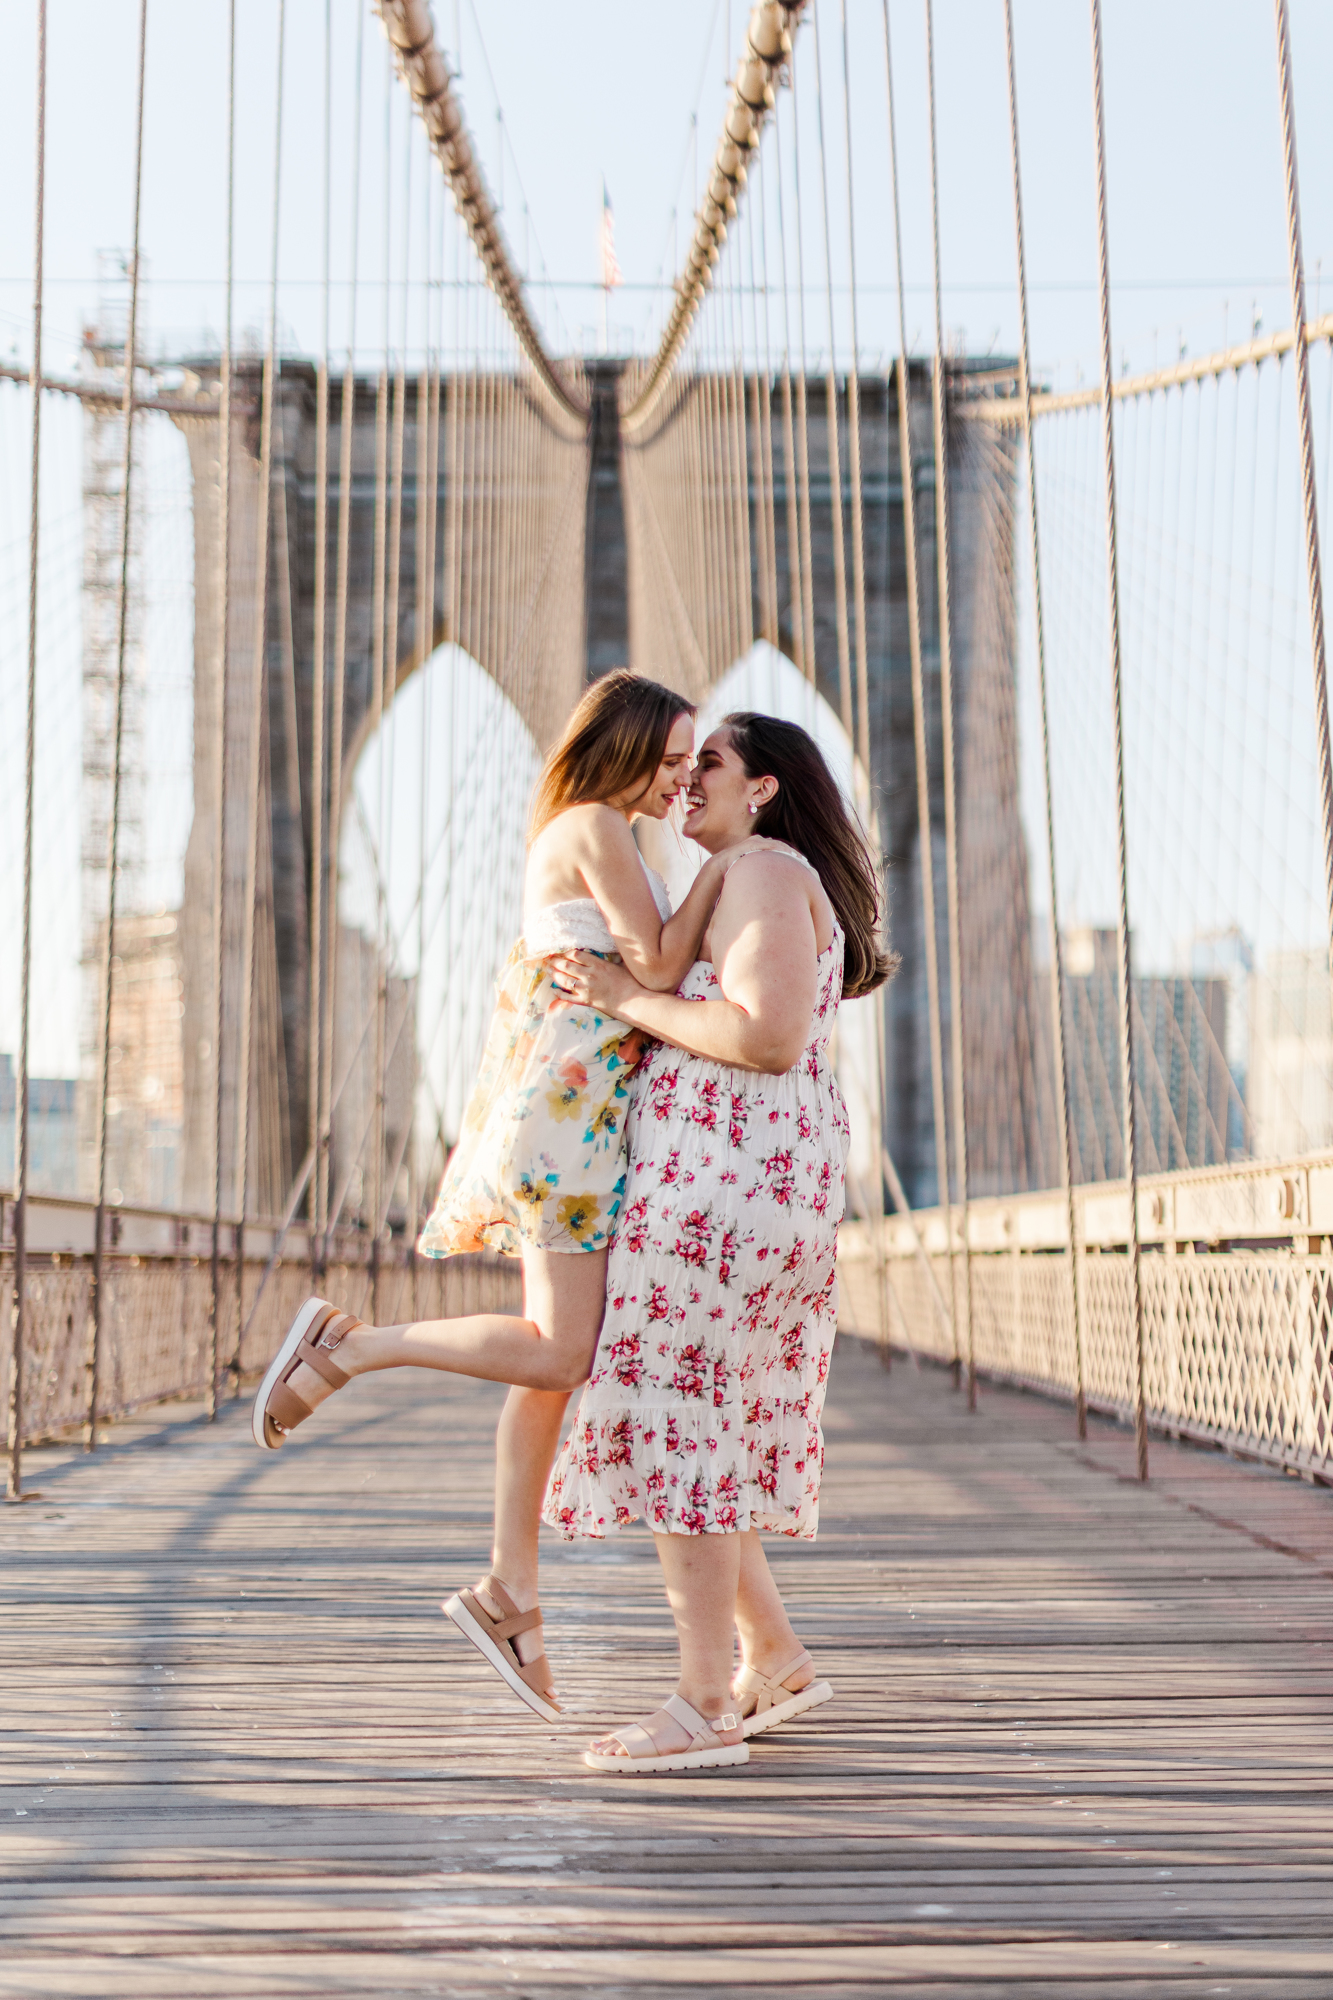 Playful and Fun Springtime Engagement Photo Shoot in DUMBO